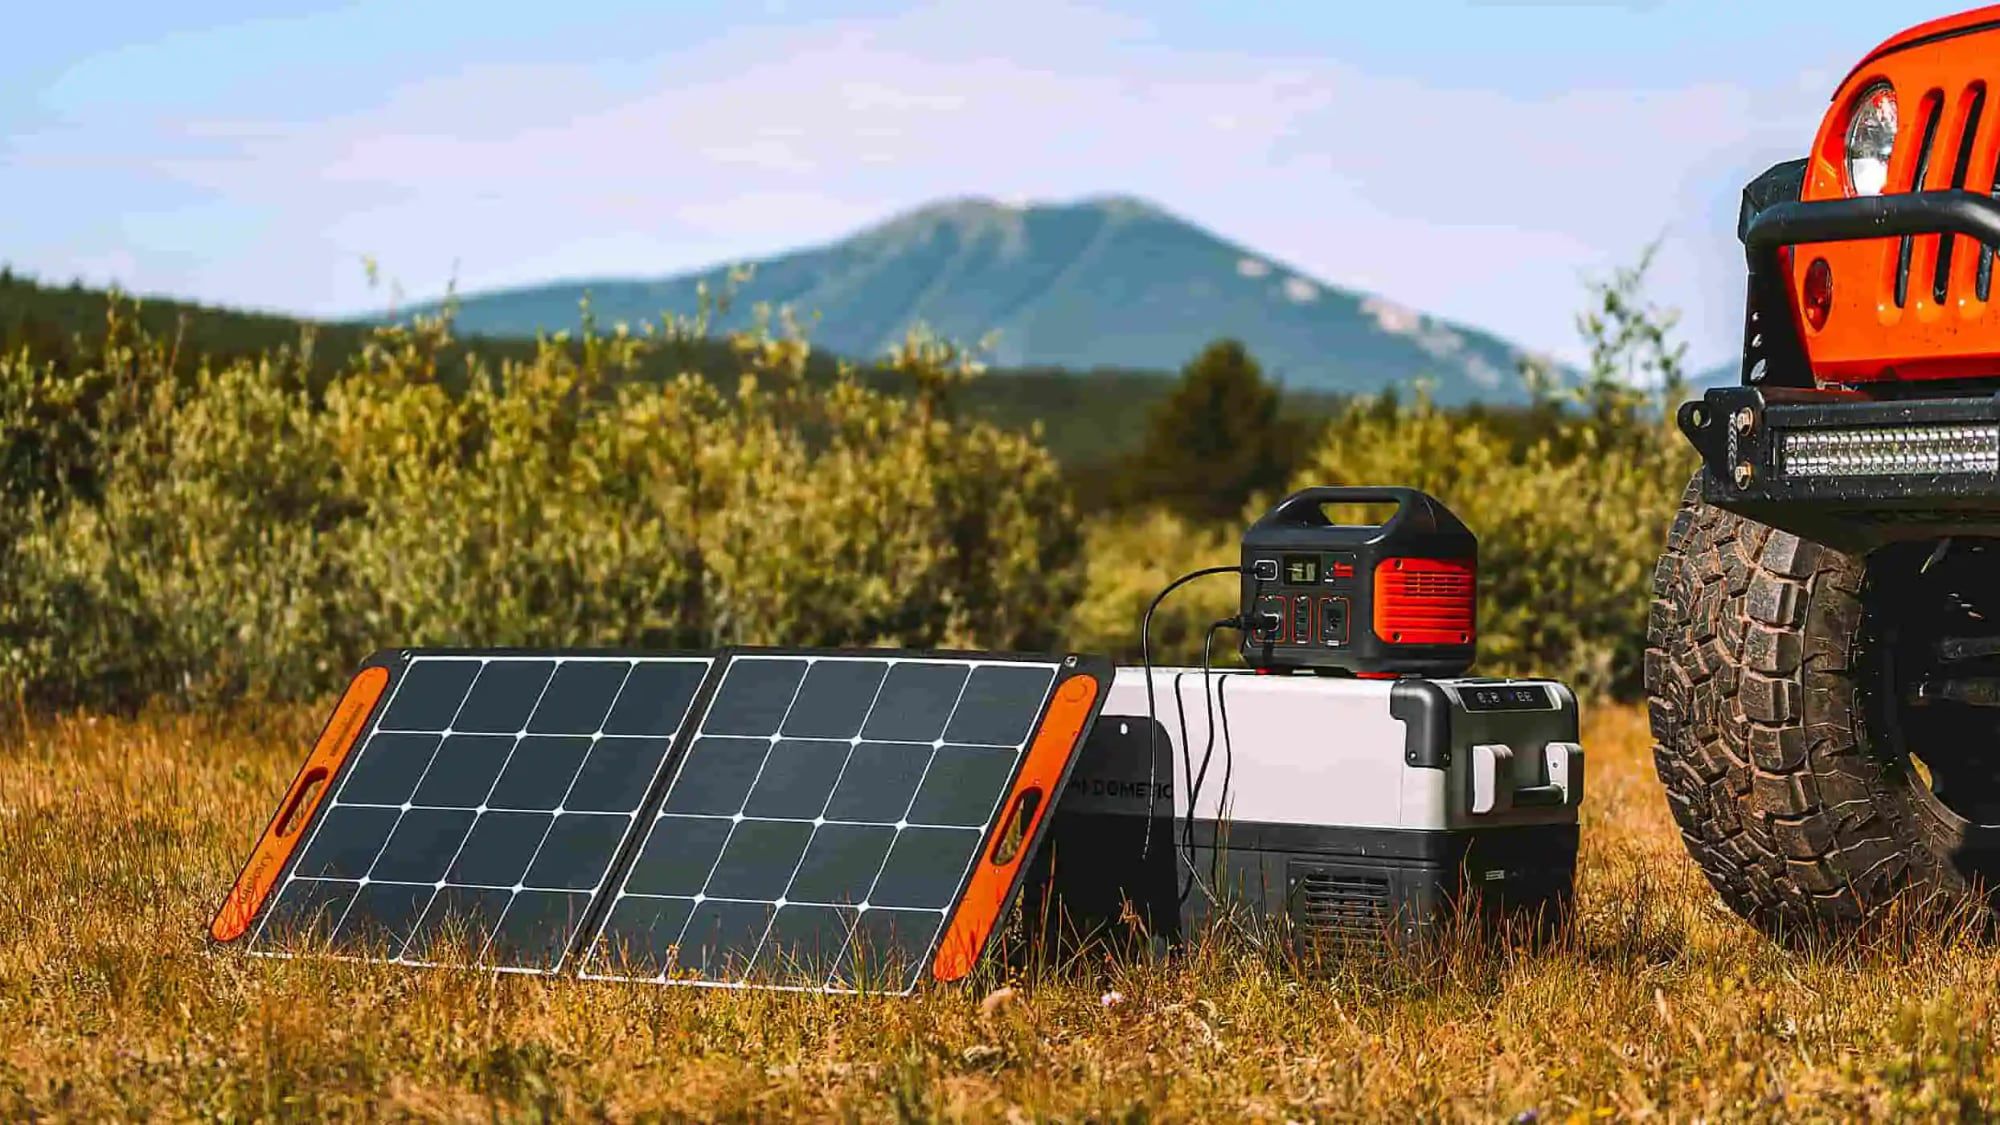 MacRumors Giveaway: Win a Jackery Explorer 500 Portable Power Station and 100W Solar Panel